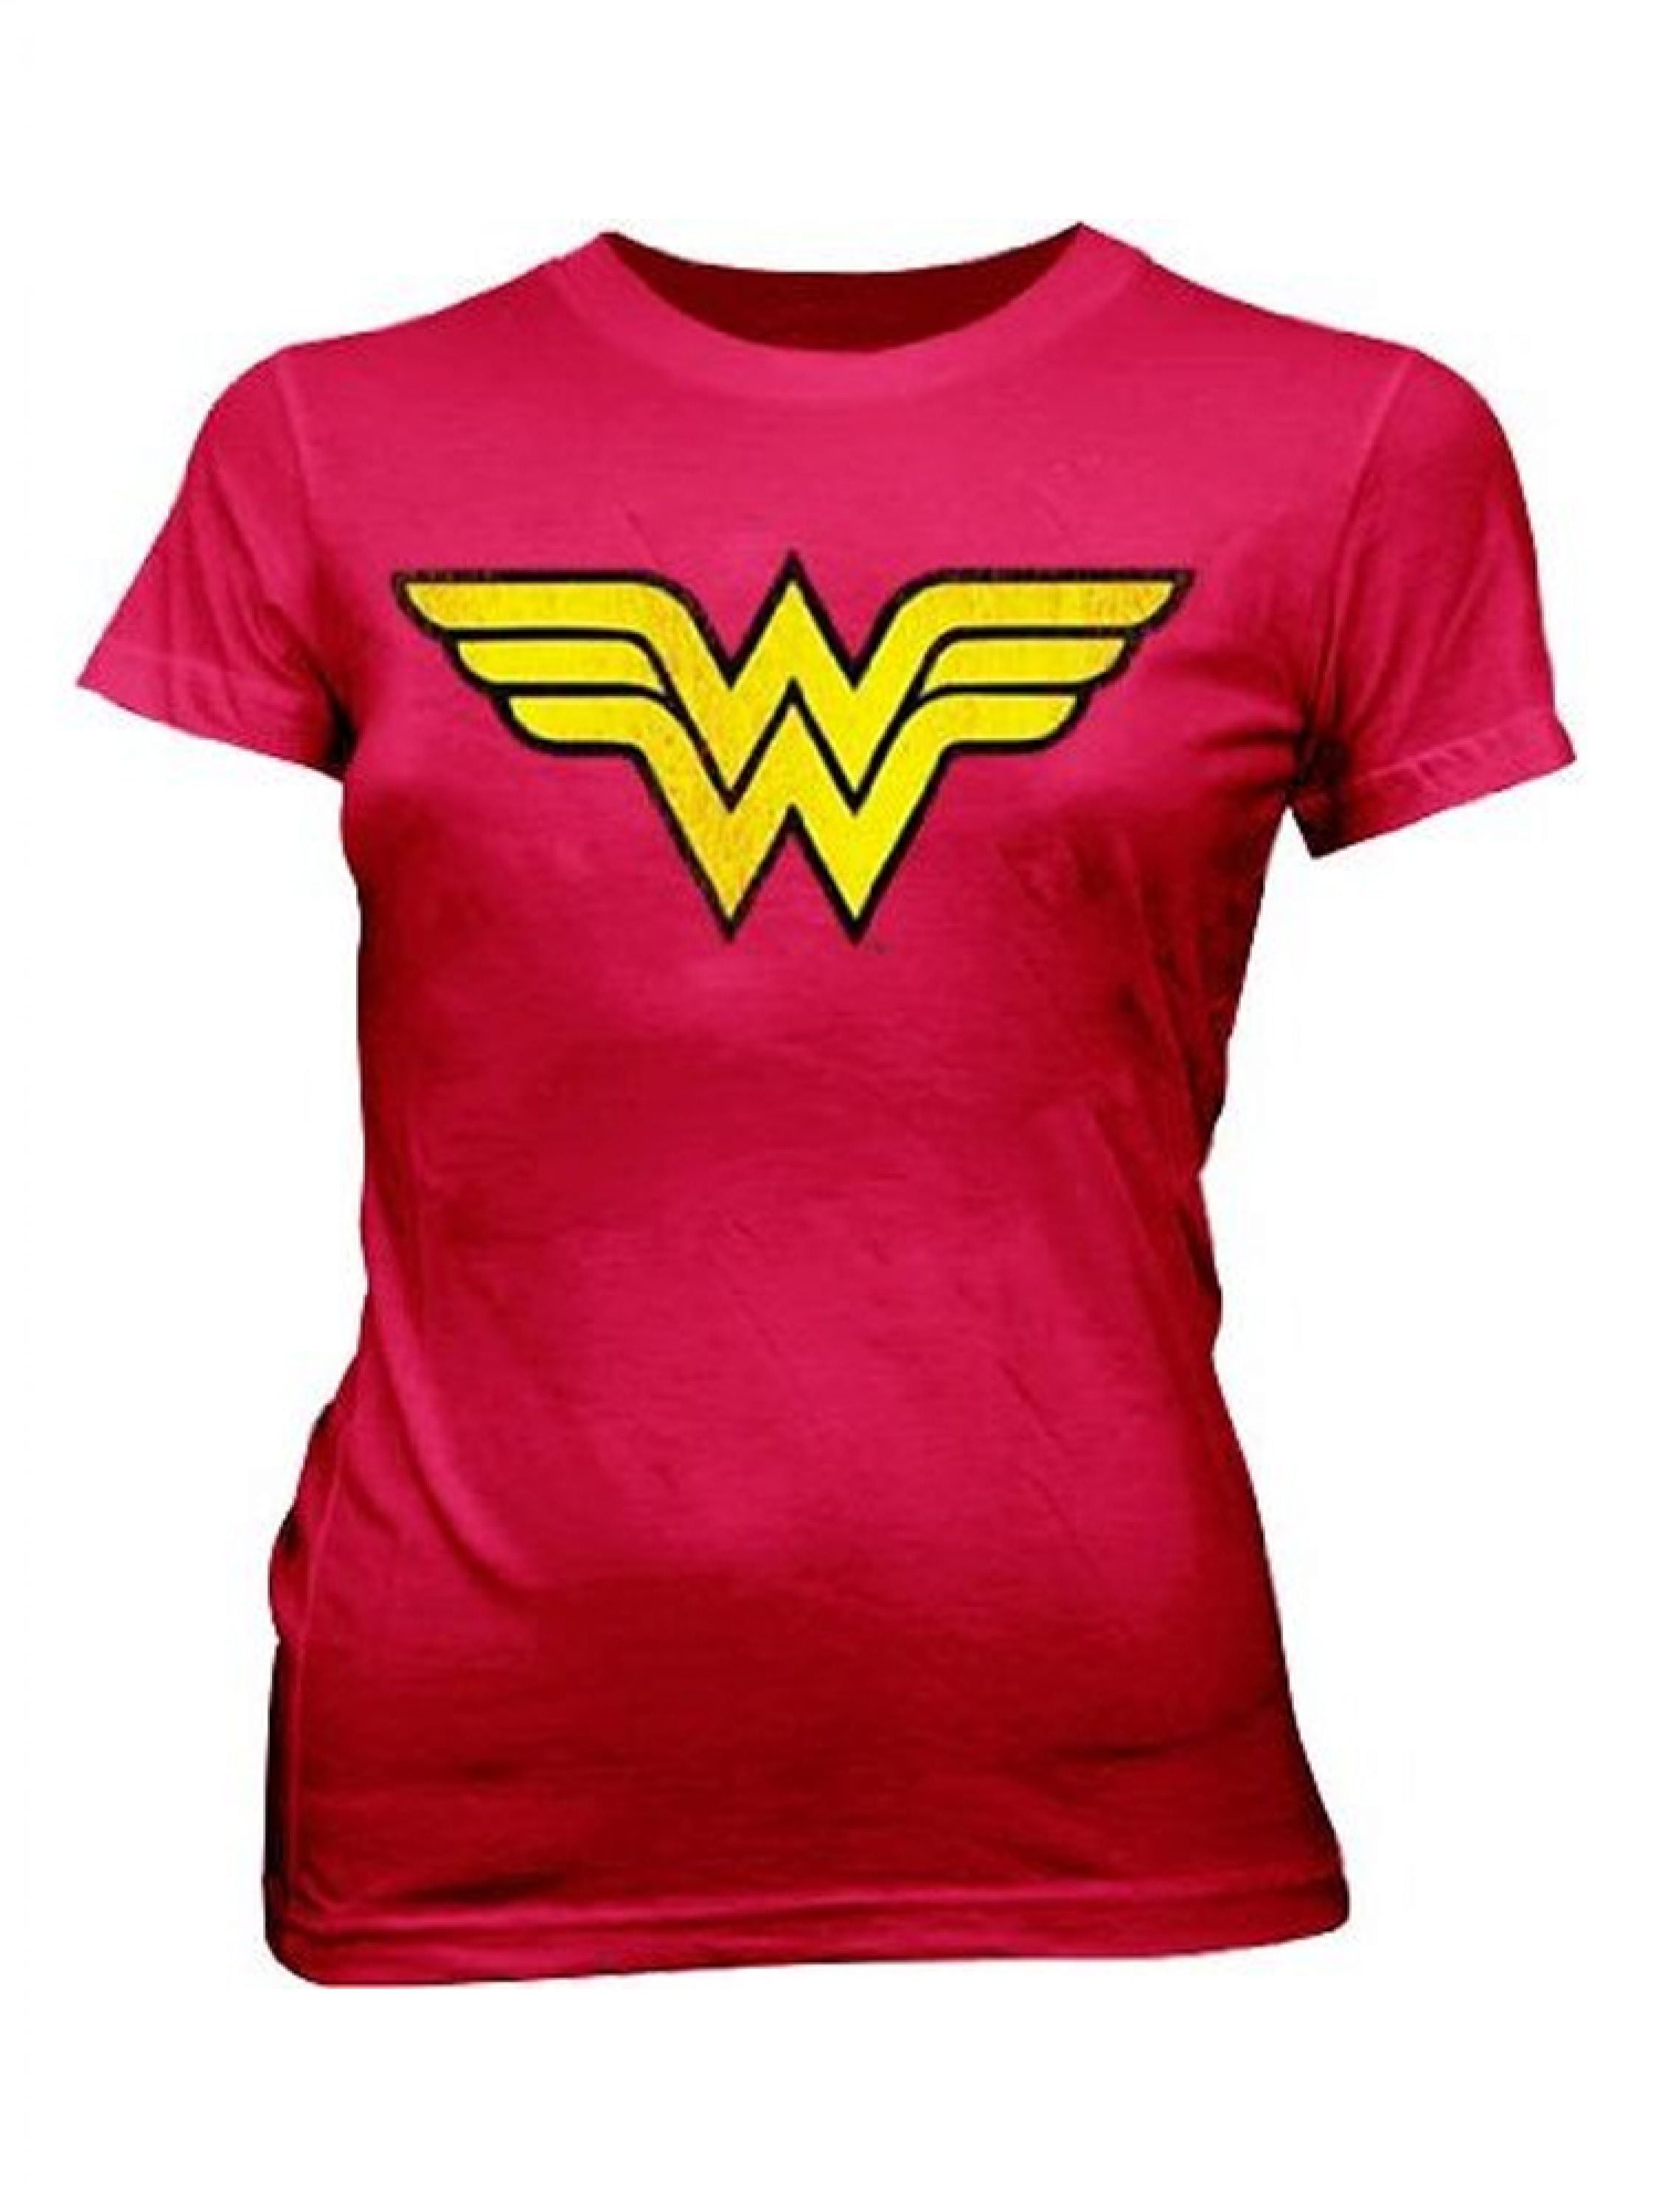 Daily Limit Exceeded Wonder Woman T Shirts For Women Superhero Gifts ...